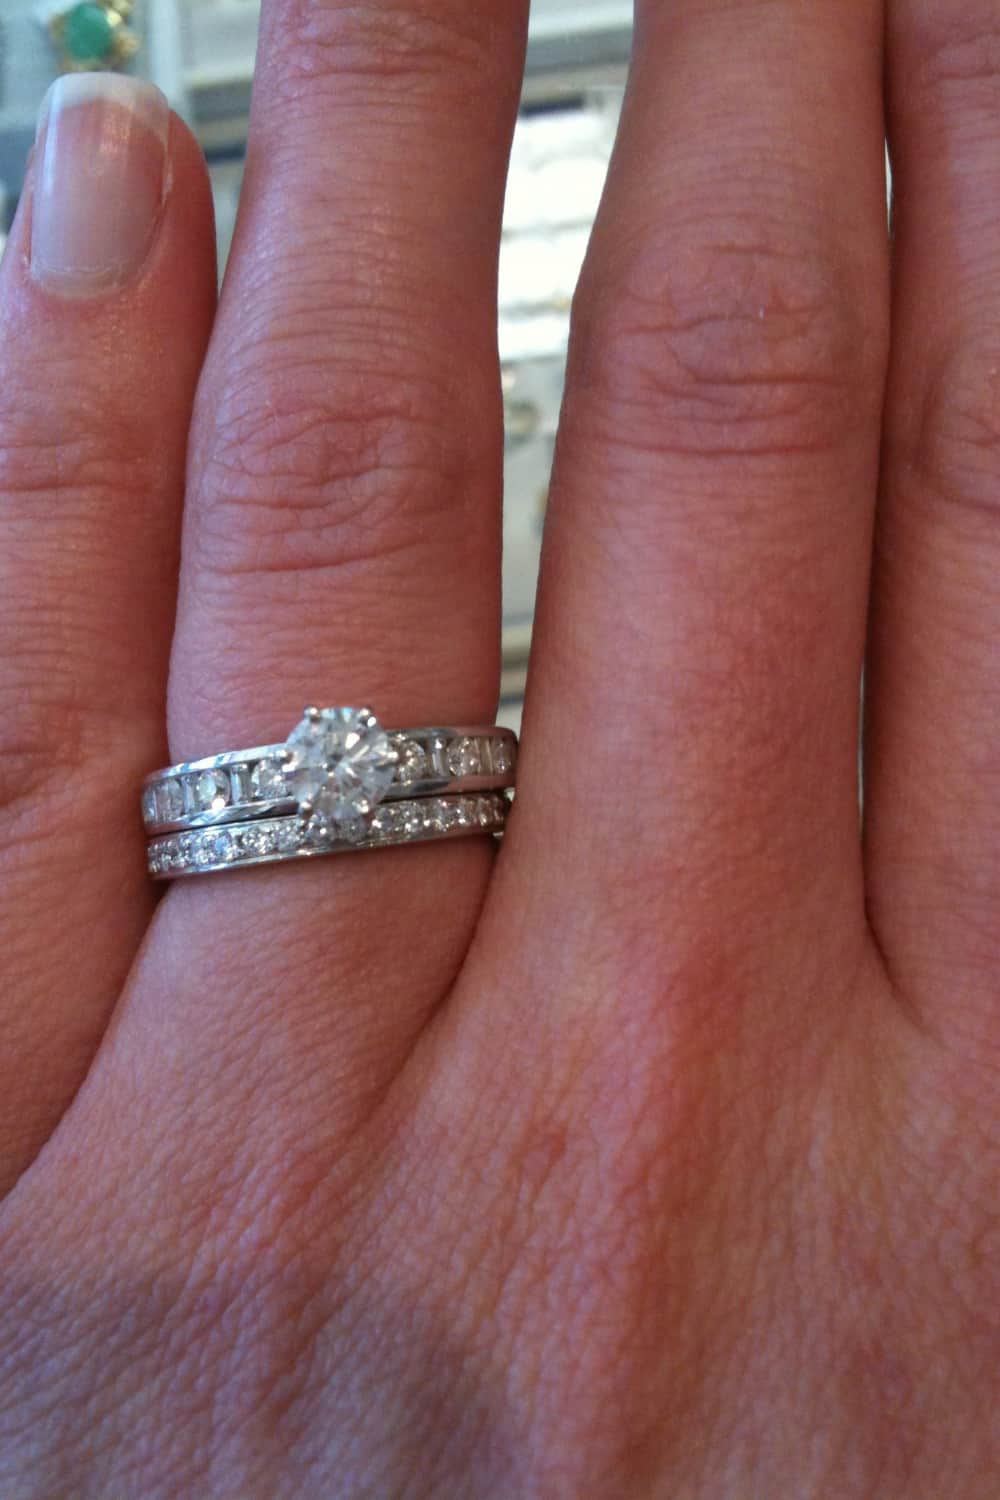 How Do You Wear Your Wedding Rings?